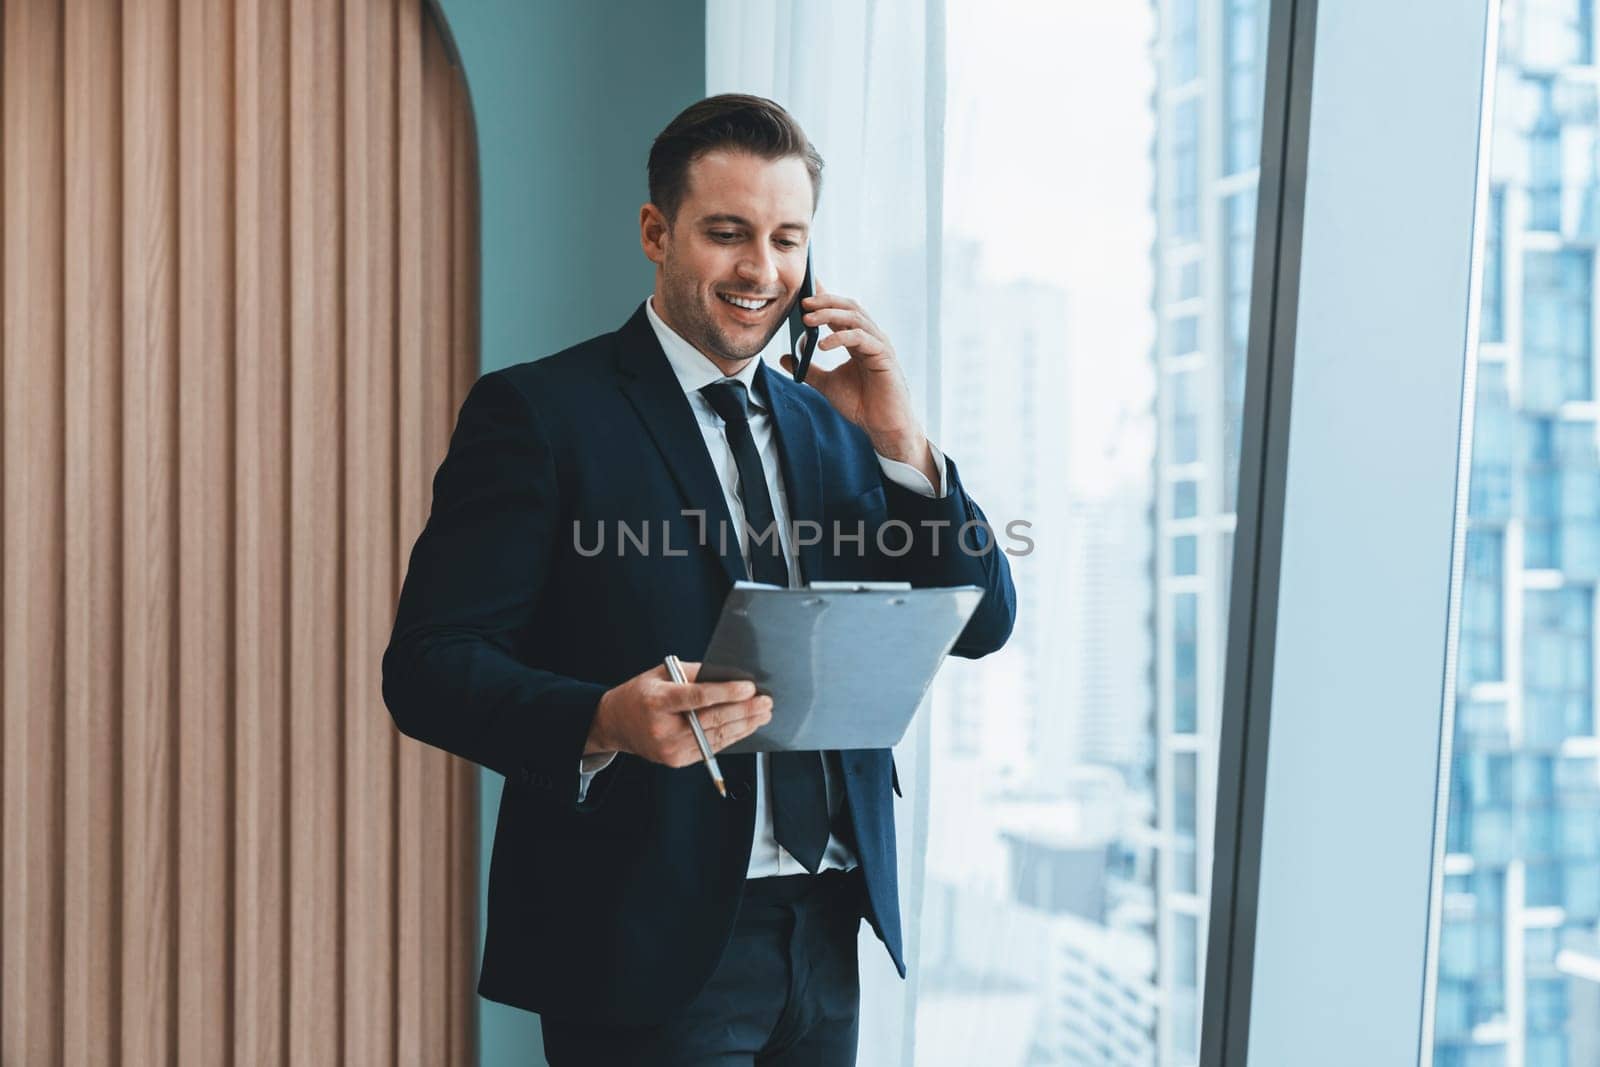 Portrait of professional businessman stand near window with skyscraper while phone calling and holding laptop. Busy executive manager holding laptop while multitasking working. Closeup. Ornamented.